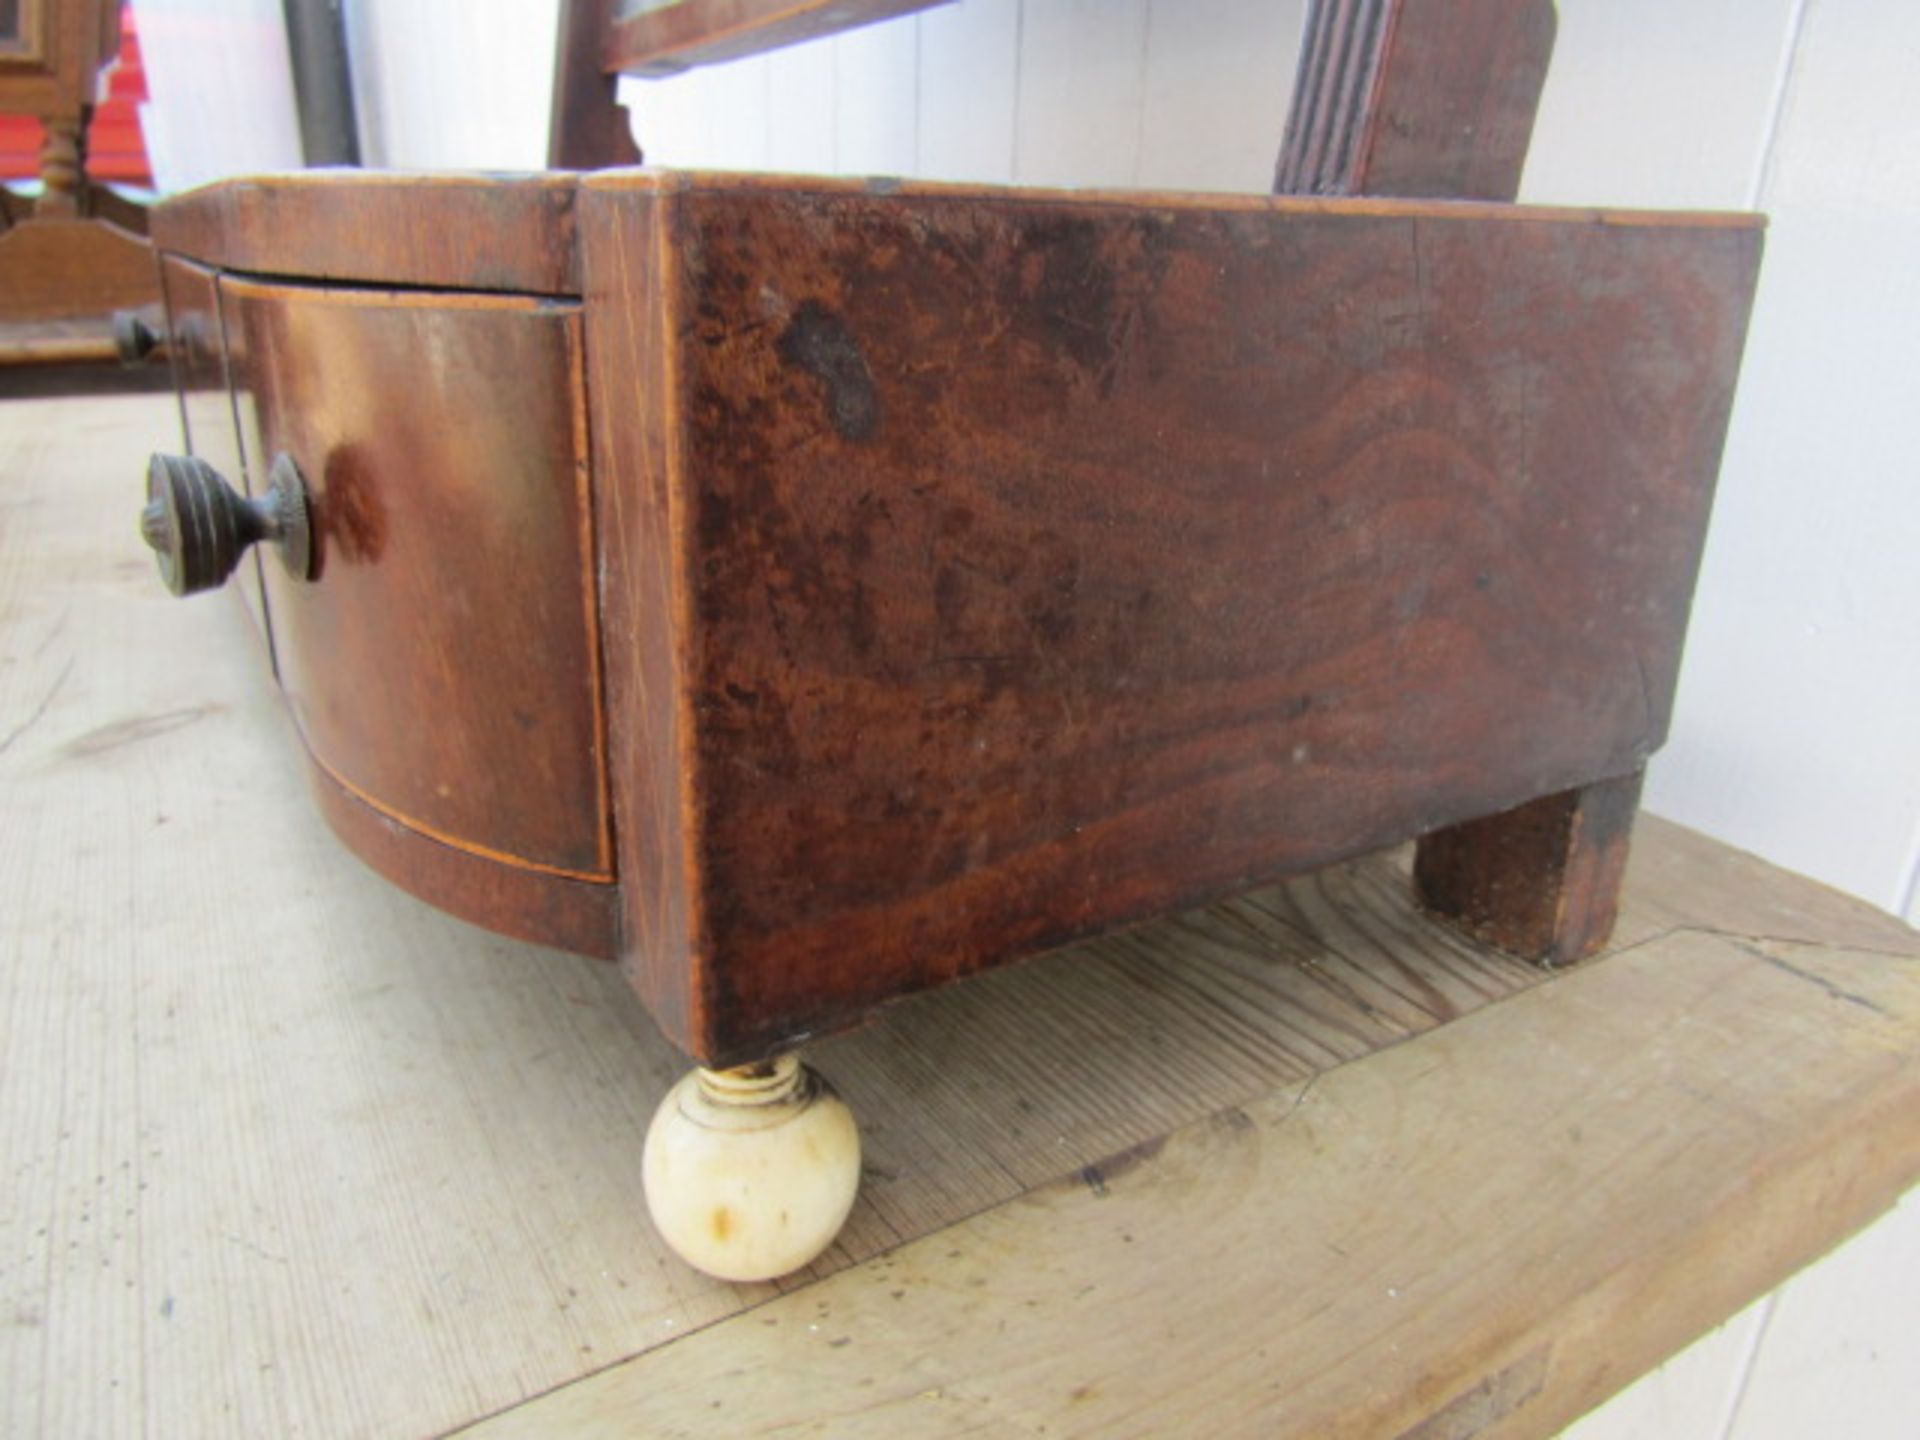 A vanity mirror with inlaid detail, porcelain feet and key - Image 3 of 6